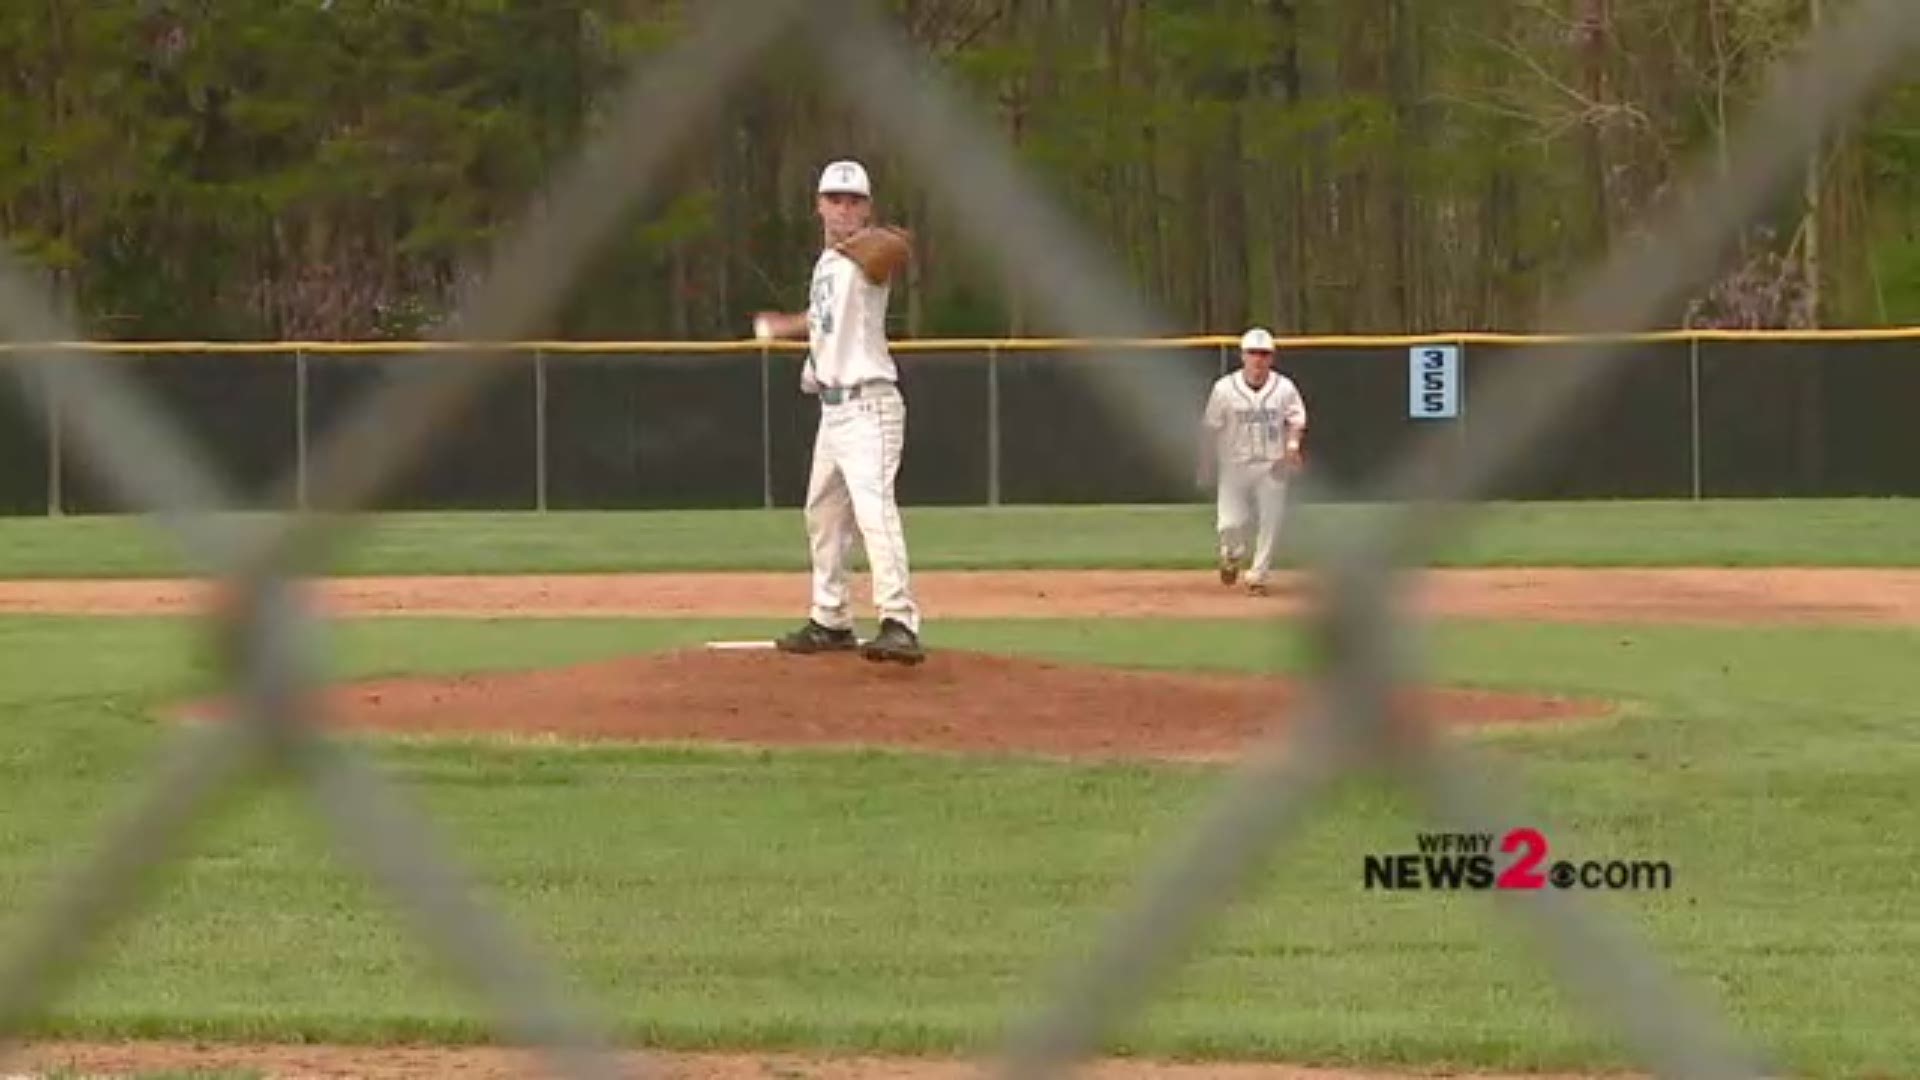 The Trinity High student threw three strikeouts in his first three innings.